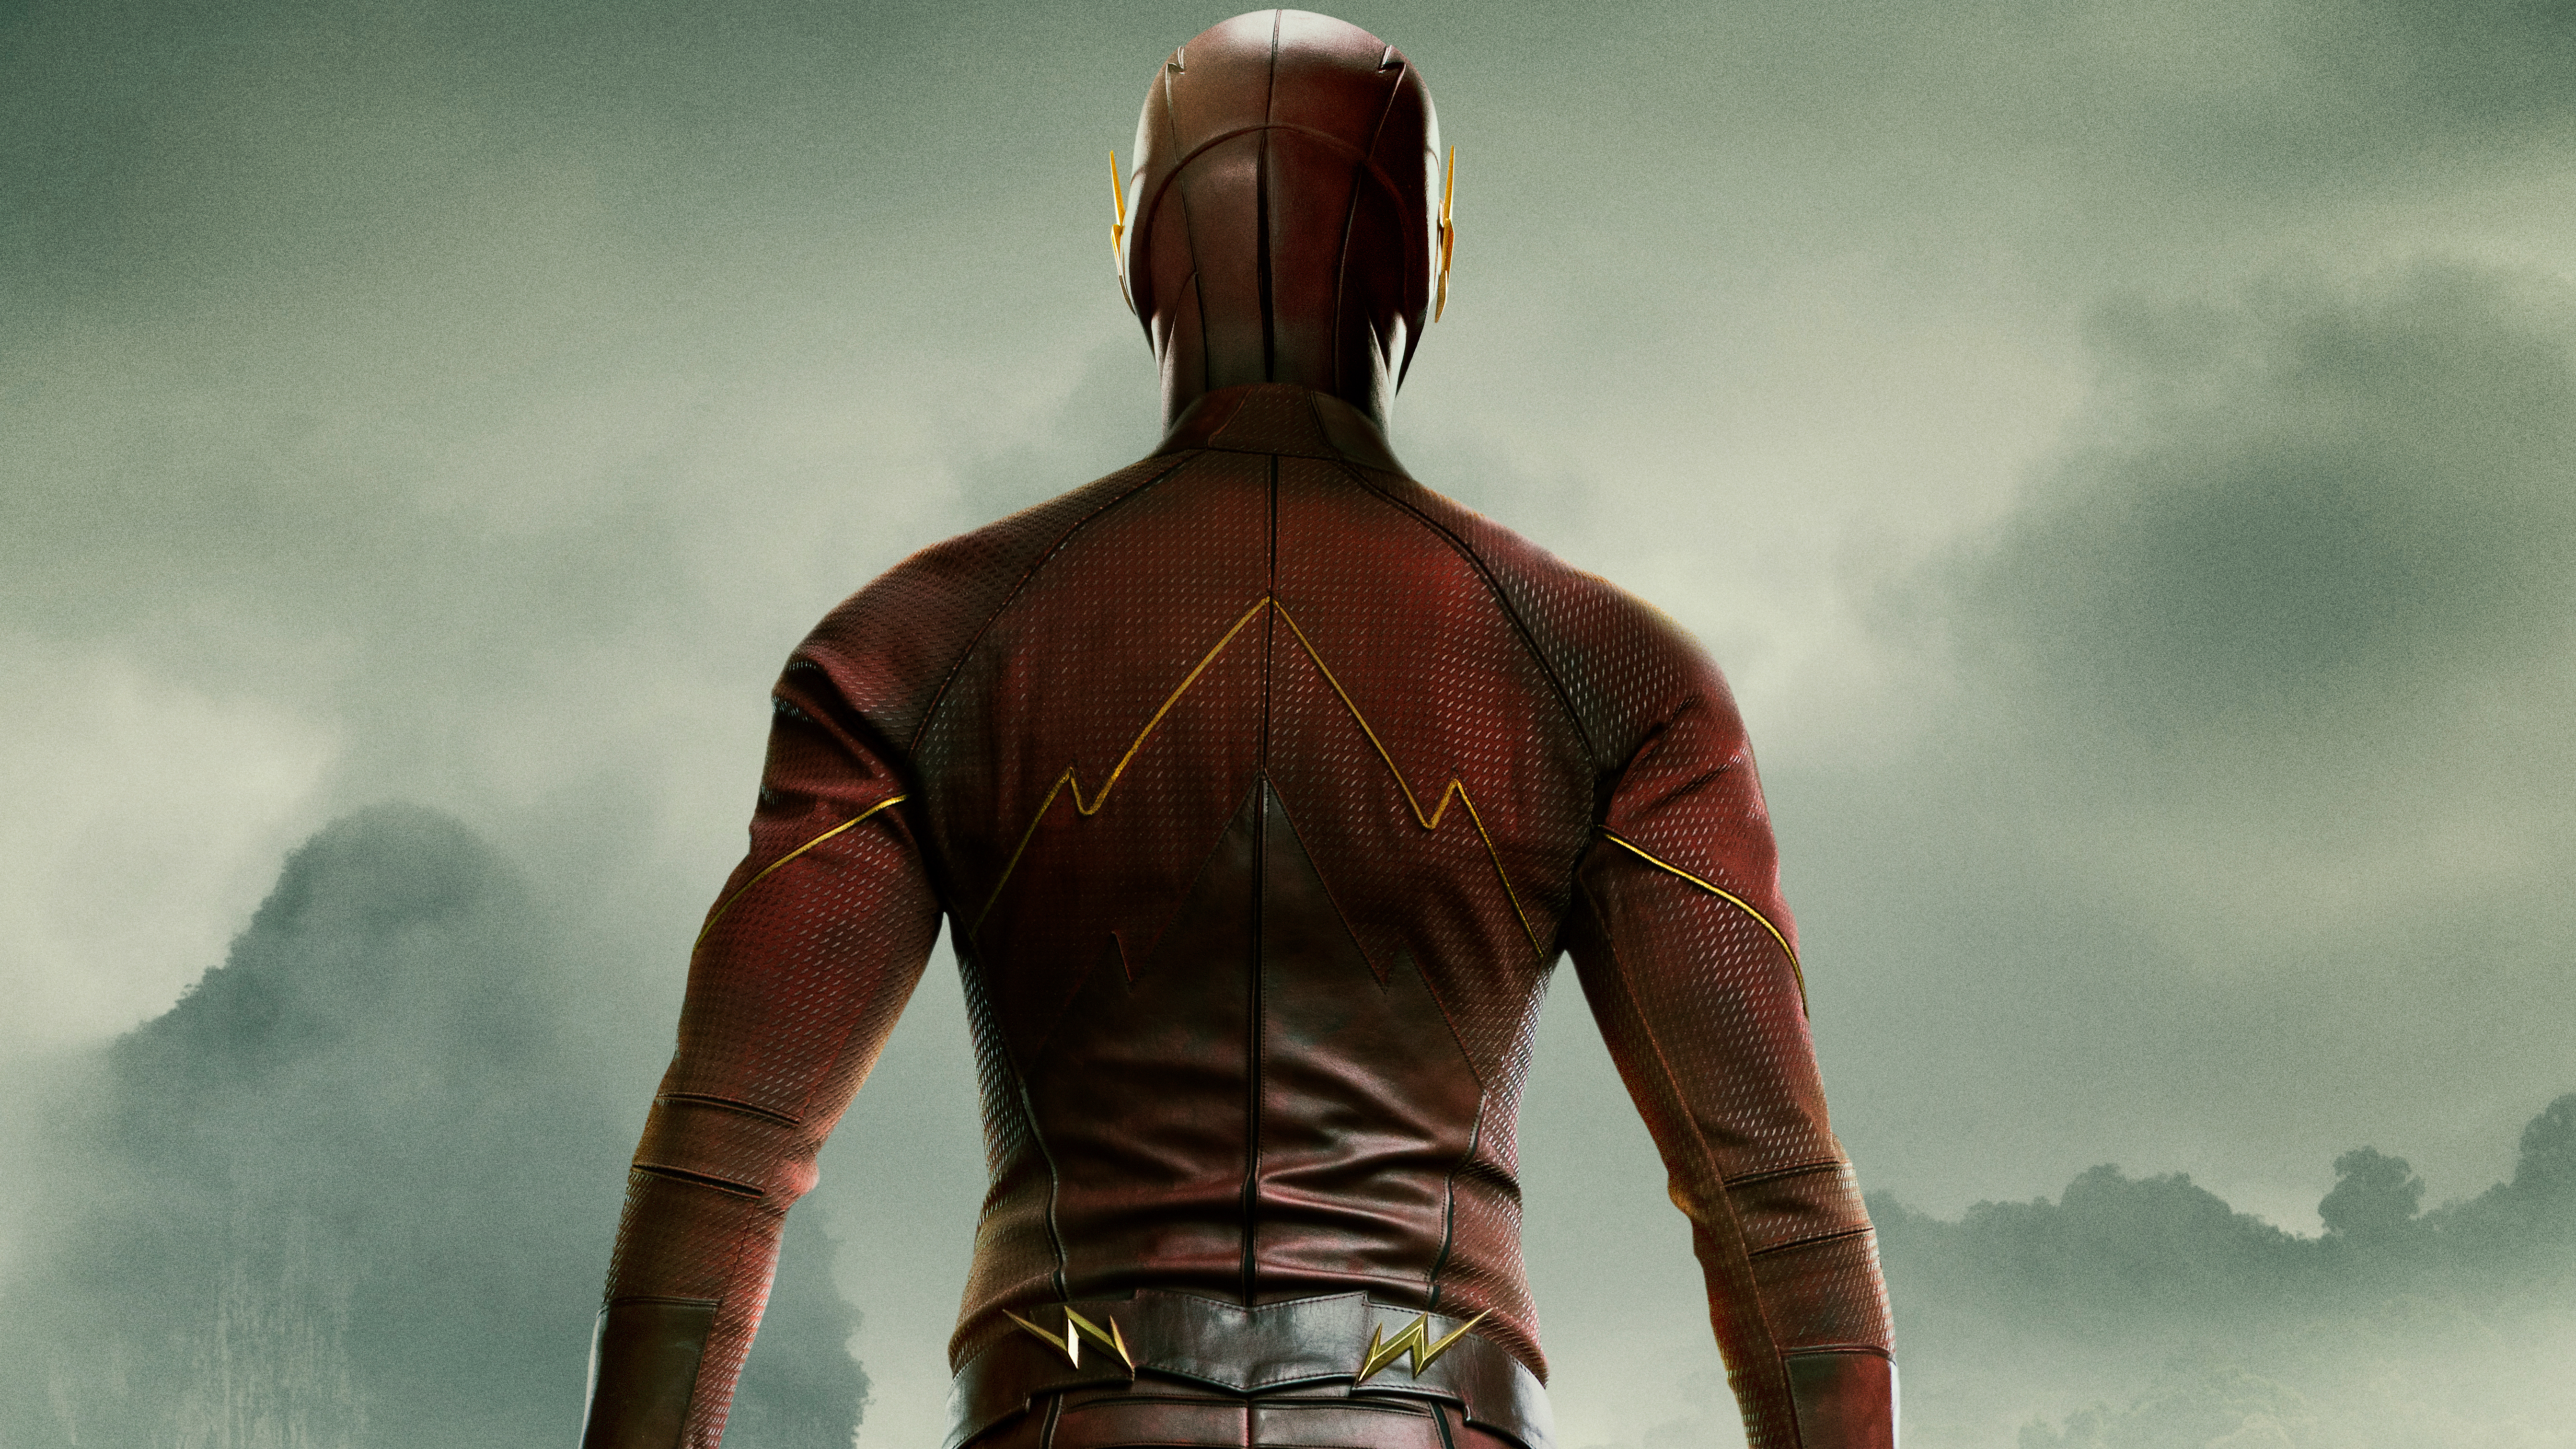 The Flash 2020 Wallpapers